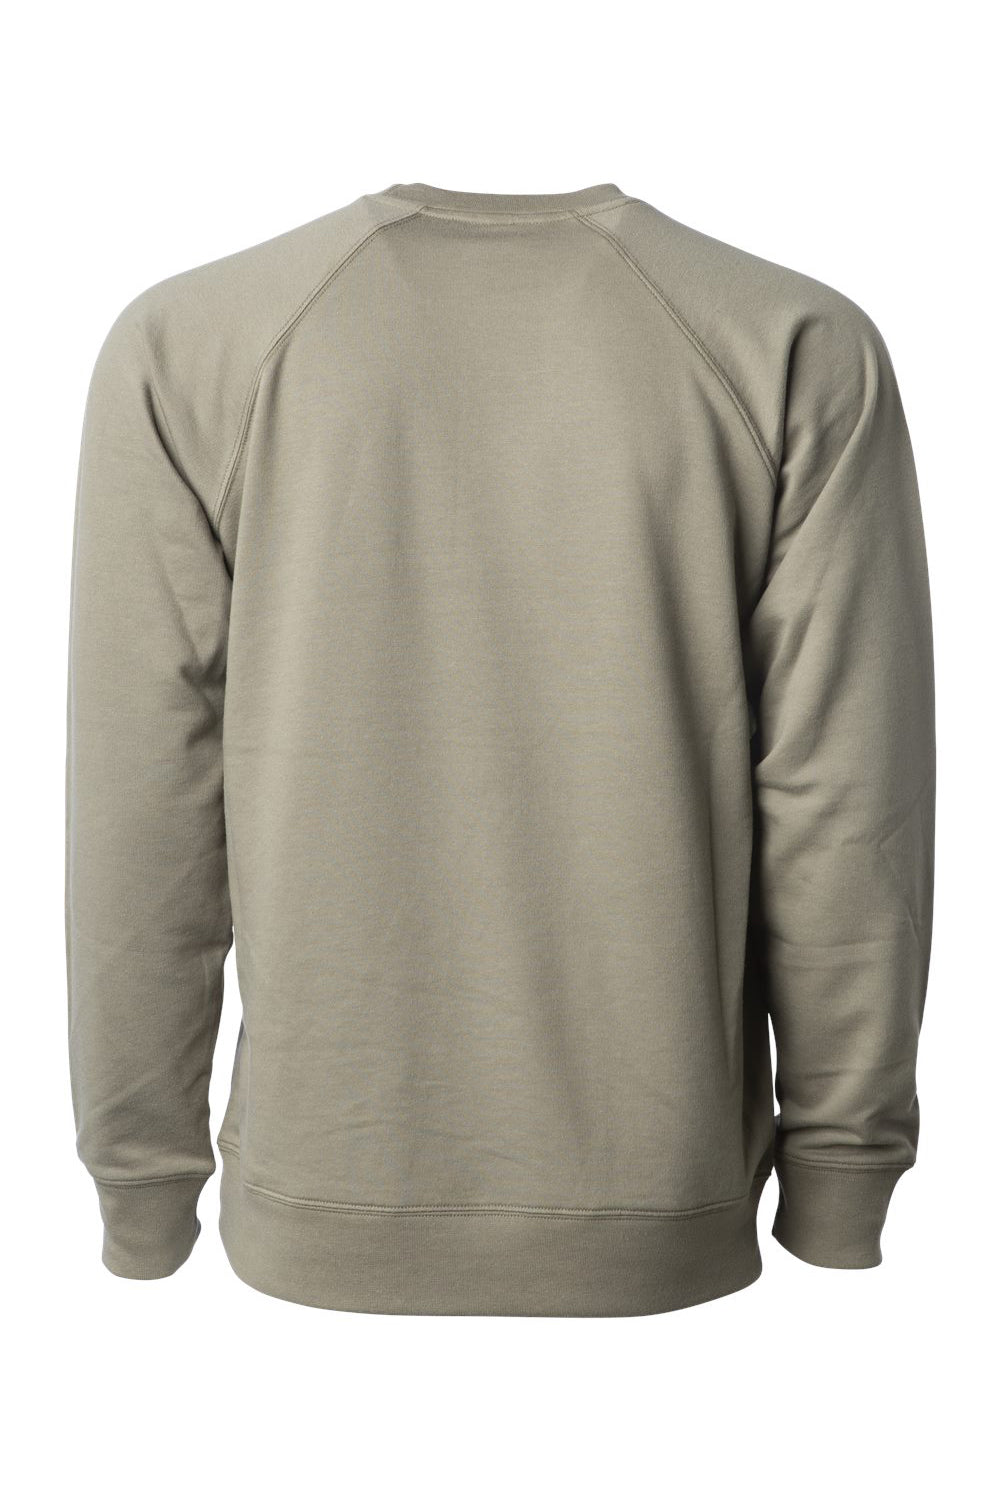 Independent Trading Co. SS1000C Mens Icon Loopback Terry Crewneck Sweatshirt Olive Green Flat Back